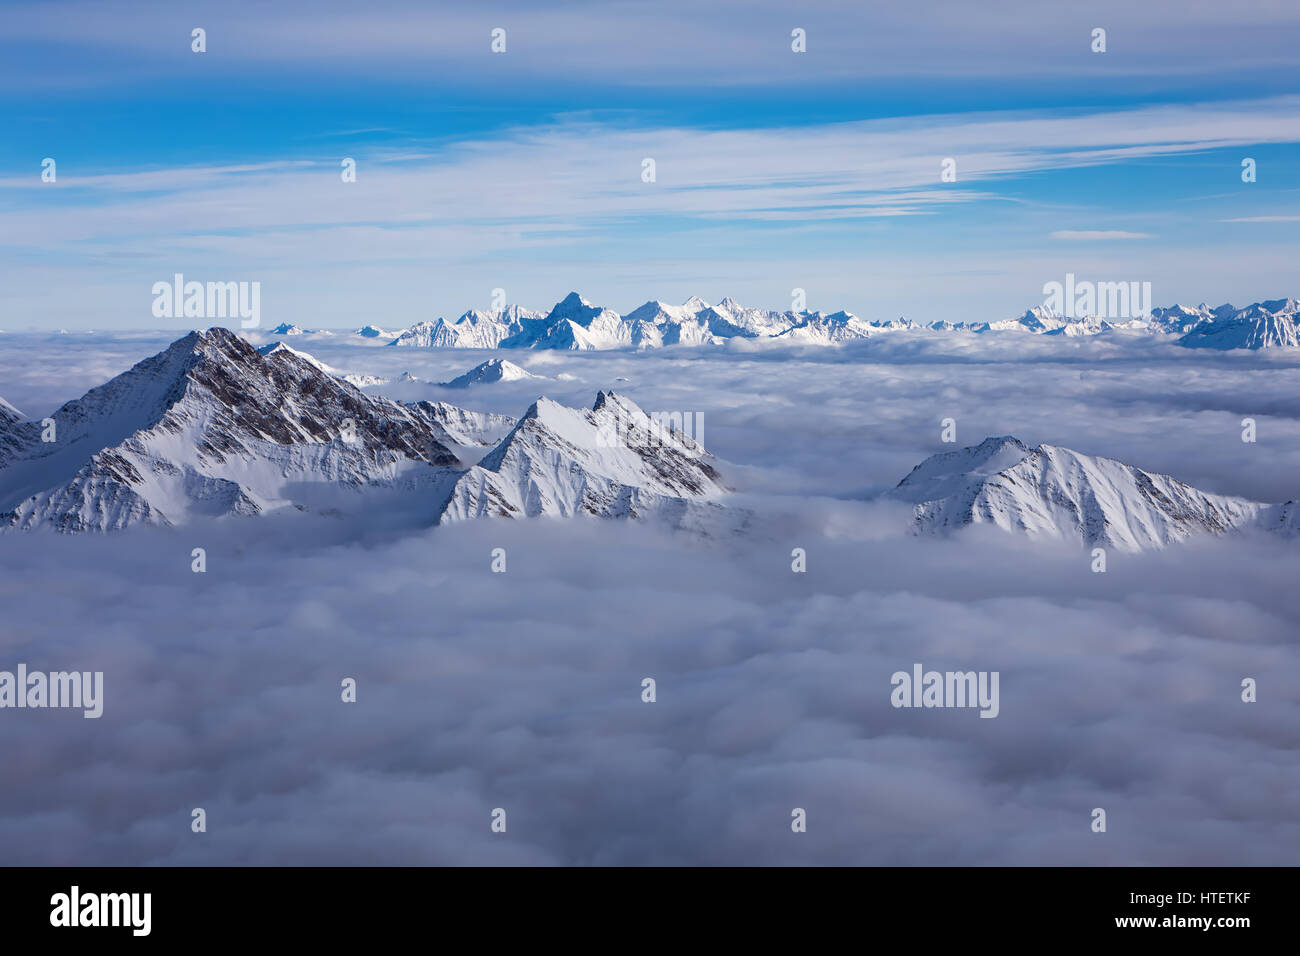 View above the clouds from Pointe Helbronner, Mont Blanc, Italy Stock Photo